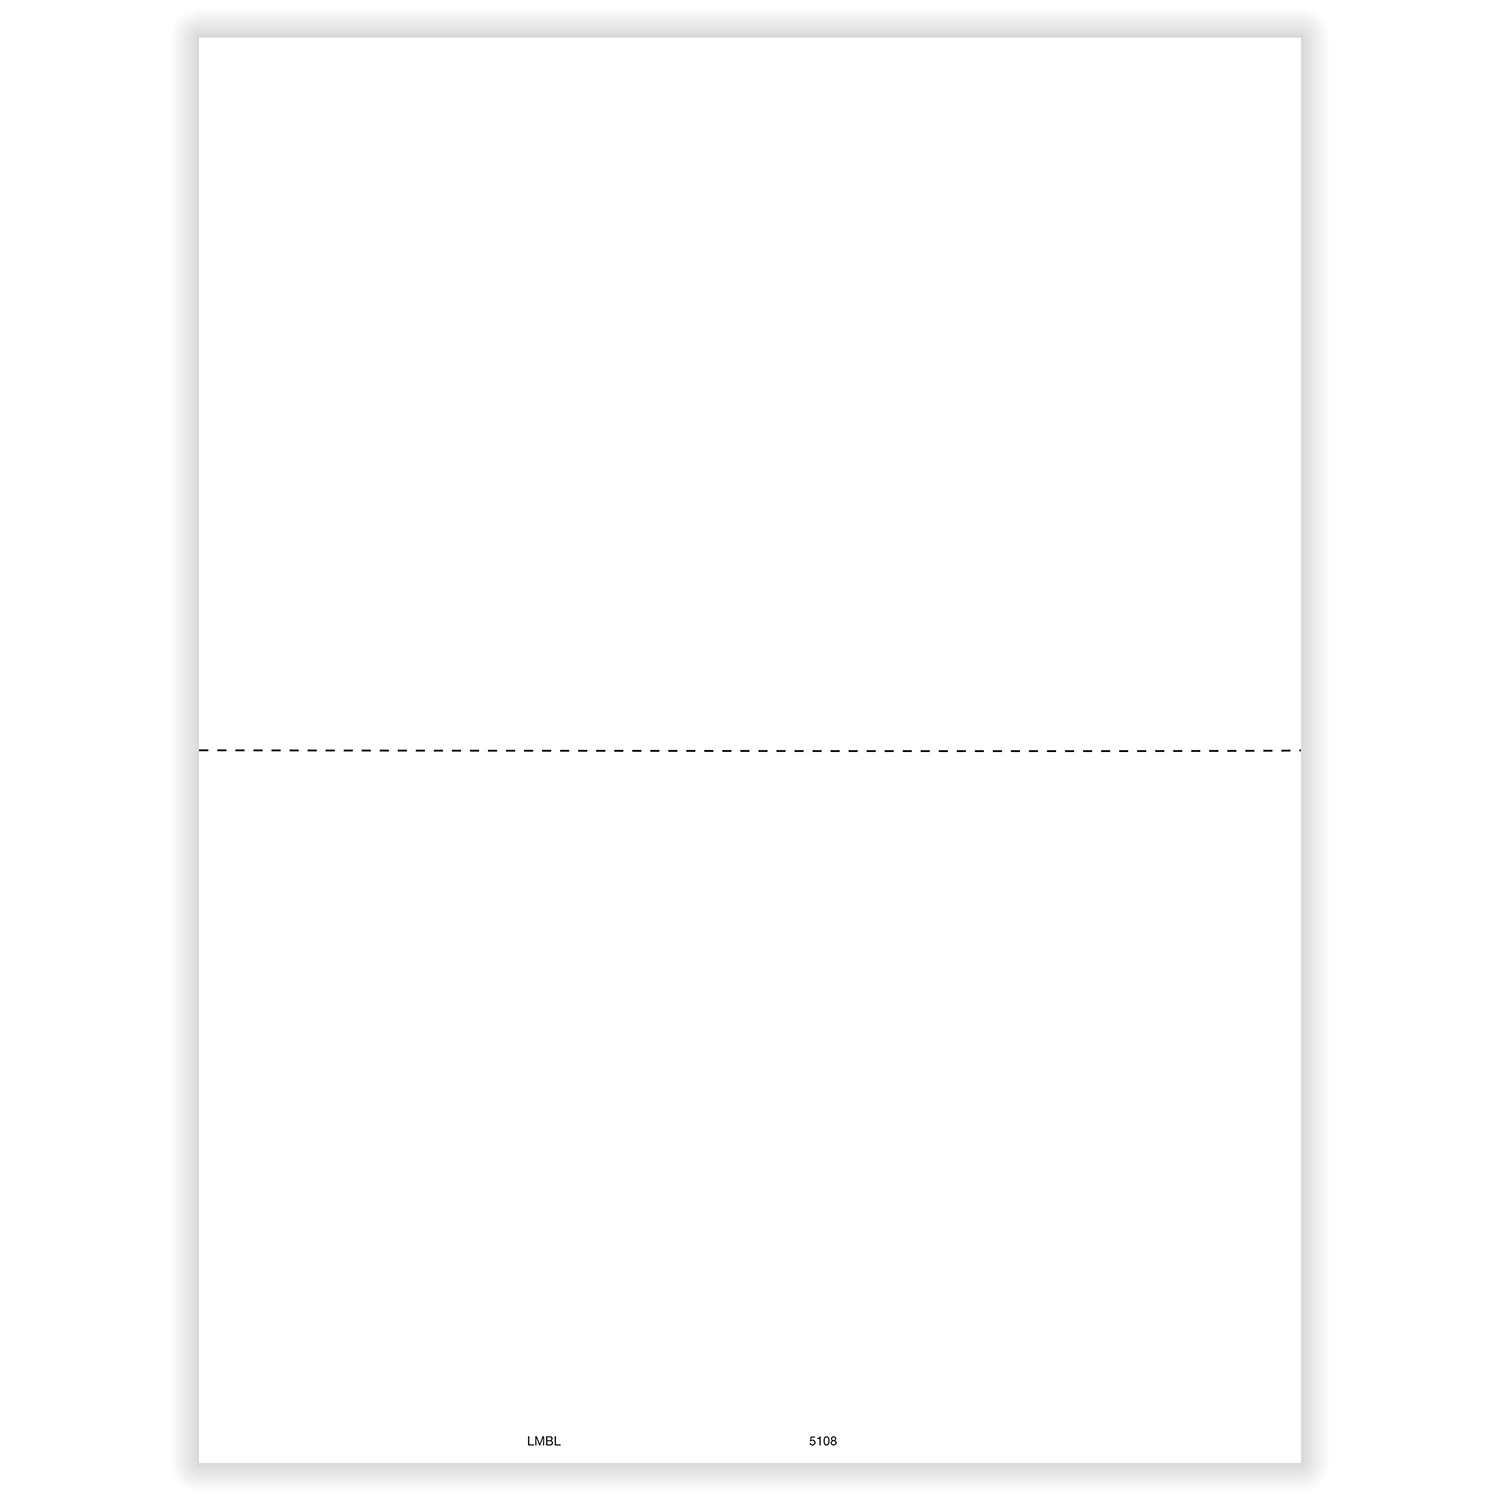 Picture of 1099-MISC Blank, Copy B, 2-Up, w/ Backer Instructions (Bulk)